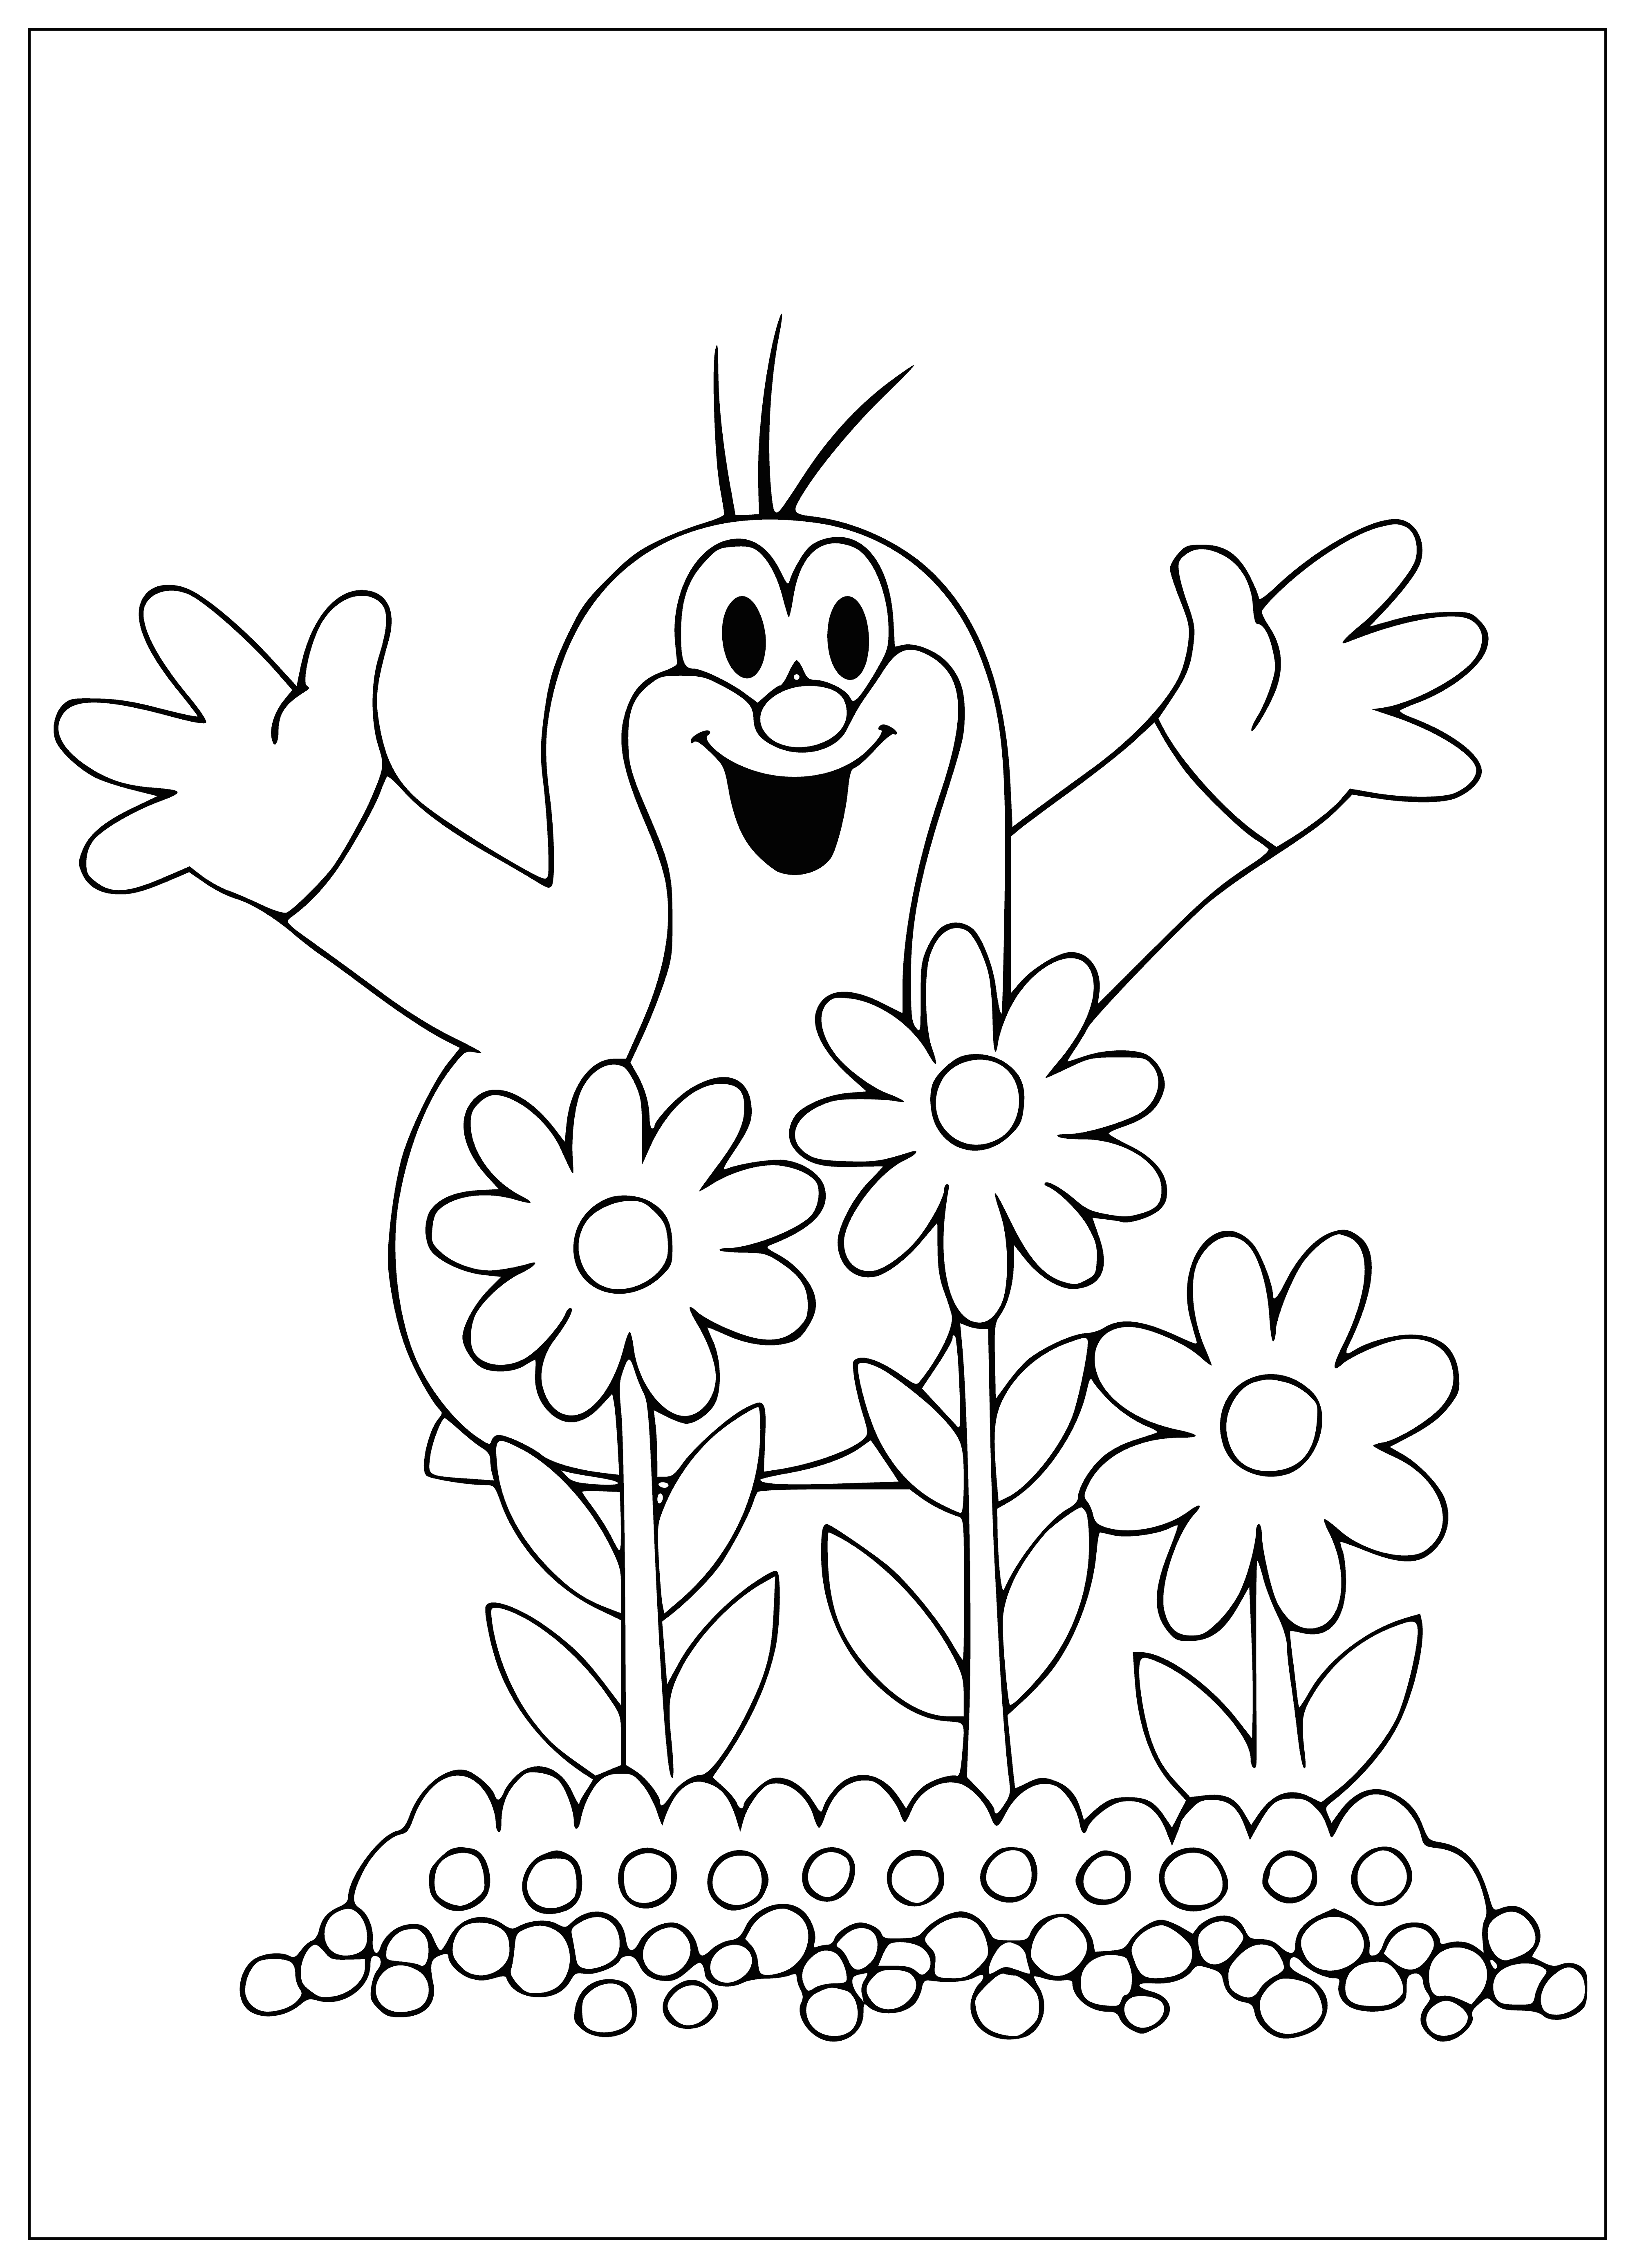 coloring page: Mole searches for yellow flowers, eats a petal, delighted with the sweet flavor.